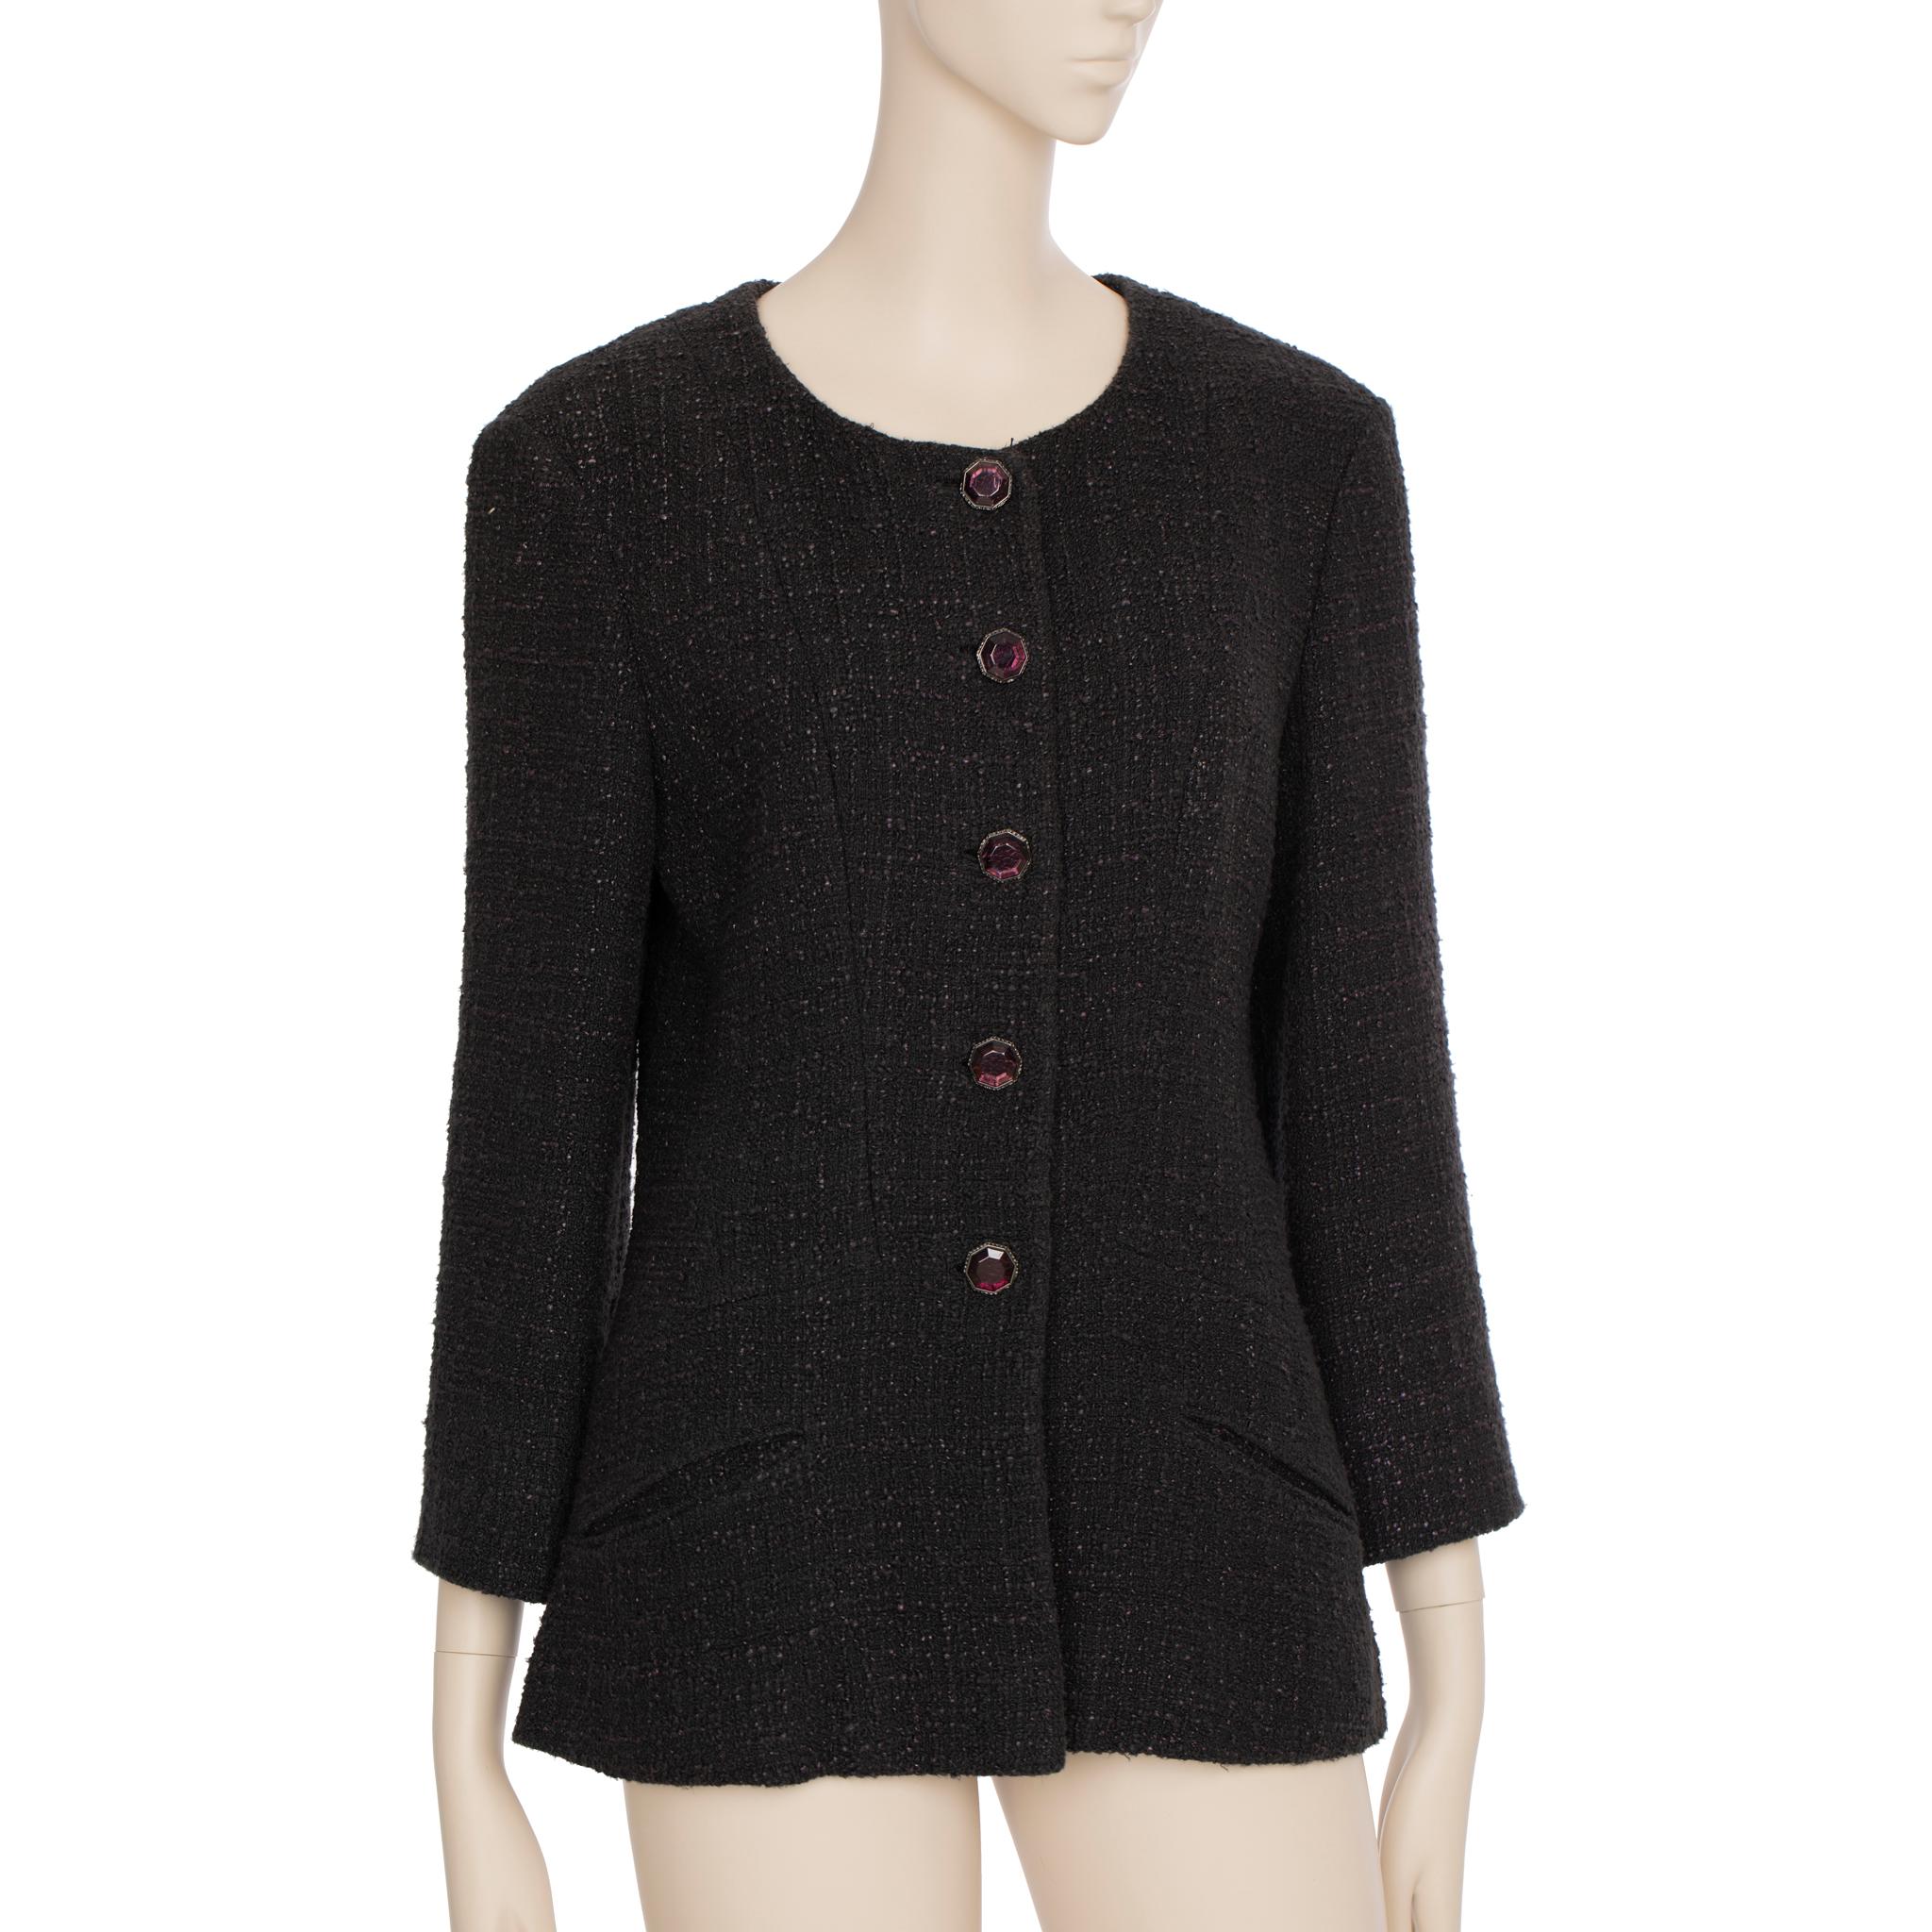 Chanel Tweed Multi-button Crew Neck Jacket 40 FR In Excellent Condition For Sale In DOUBLE BAY, NSW